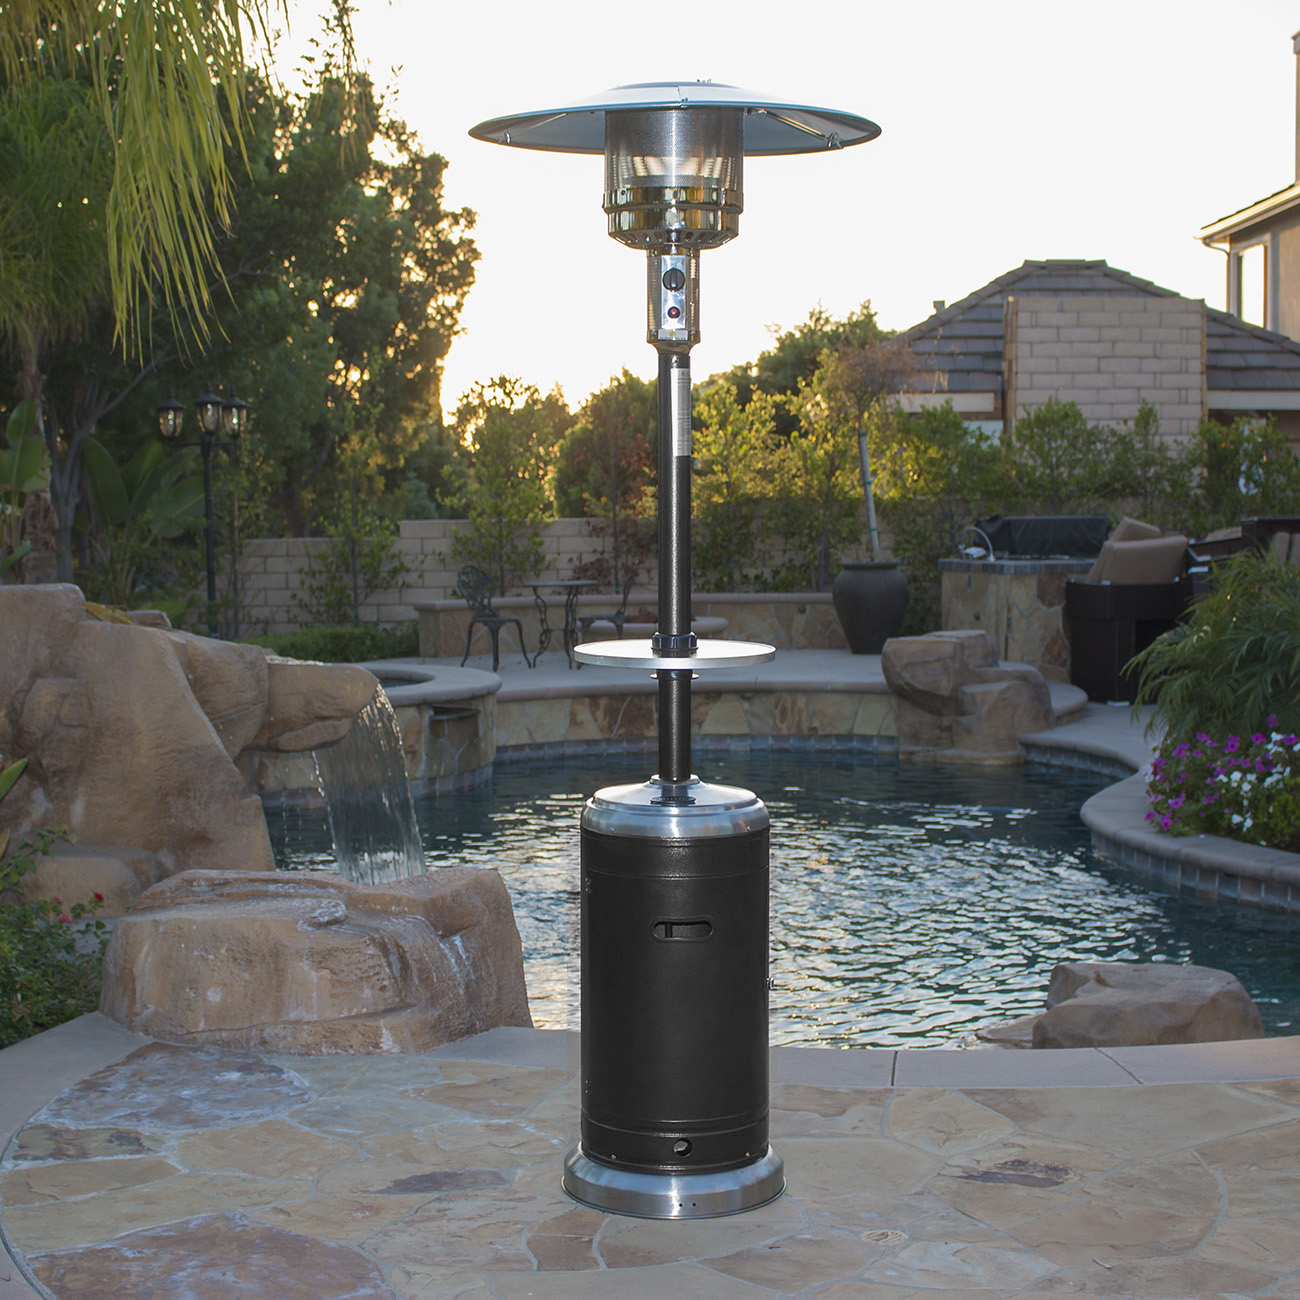 Details About 48000 Btu Black And Stainless Steel Full Size Propane Gas Patio Heater W Table for measurements 1300 X 1300